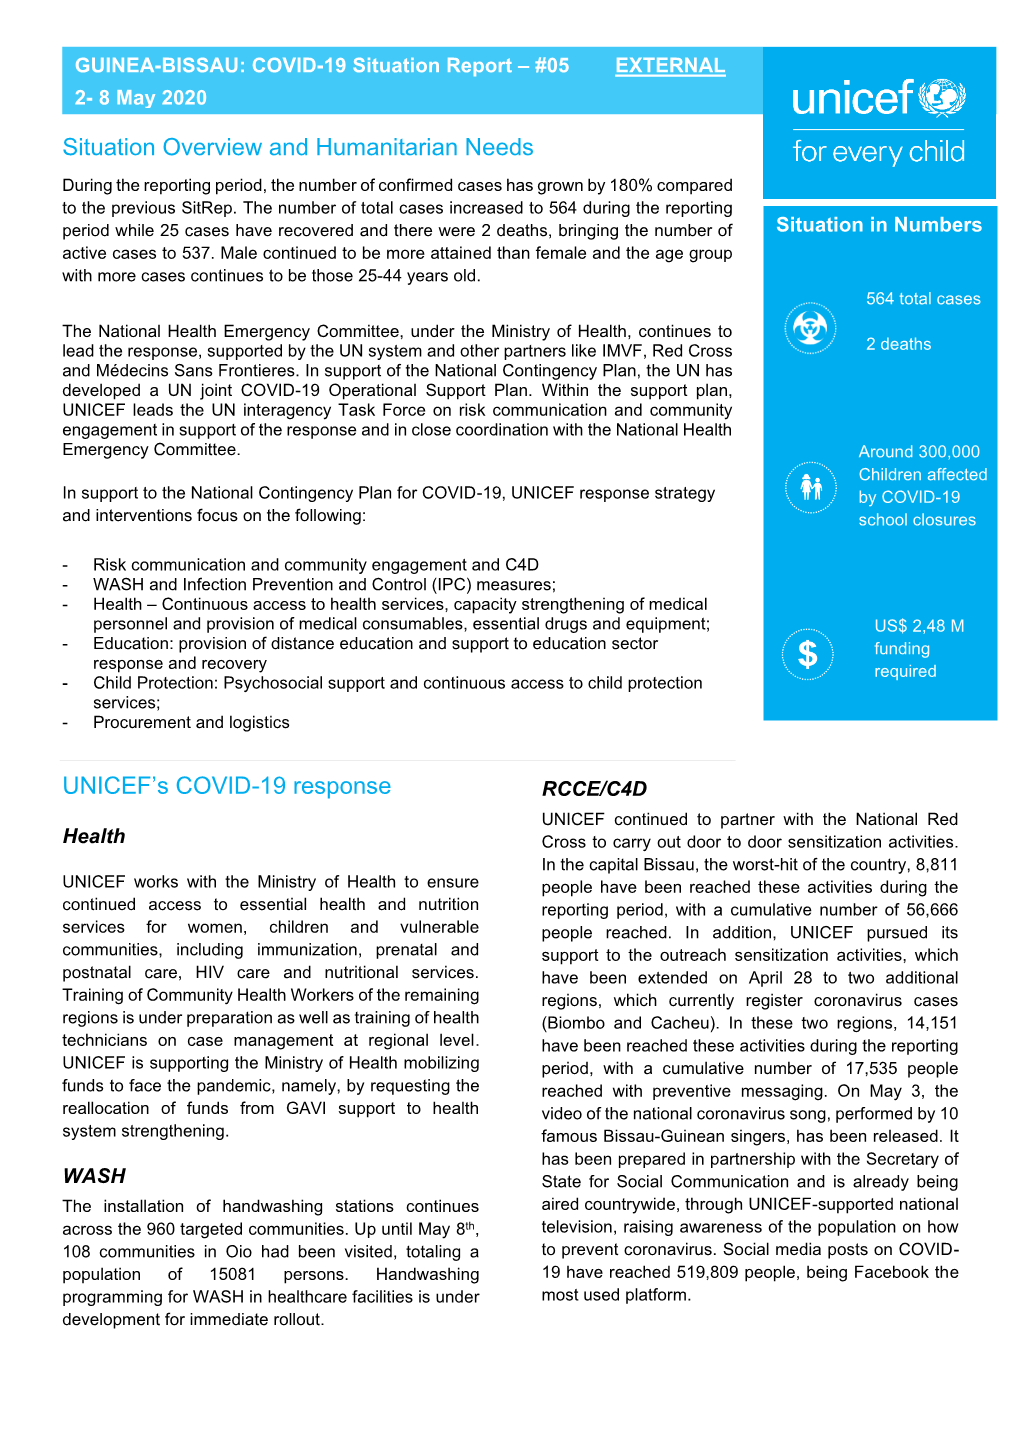 Situation Overview and Humanitarian Needs UNICEF's COVID-19 Response